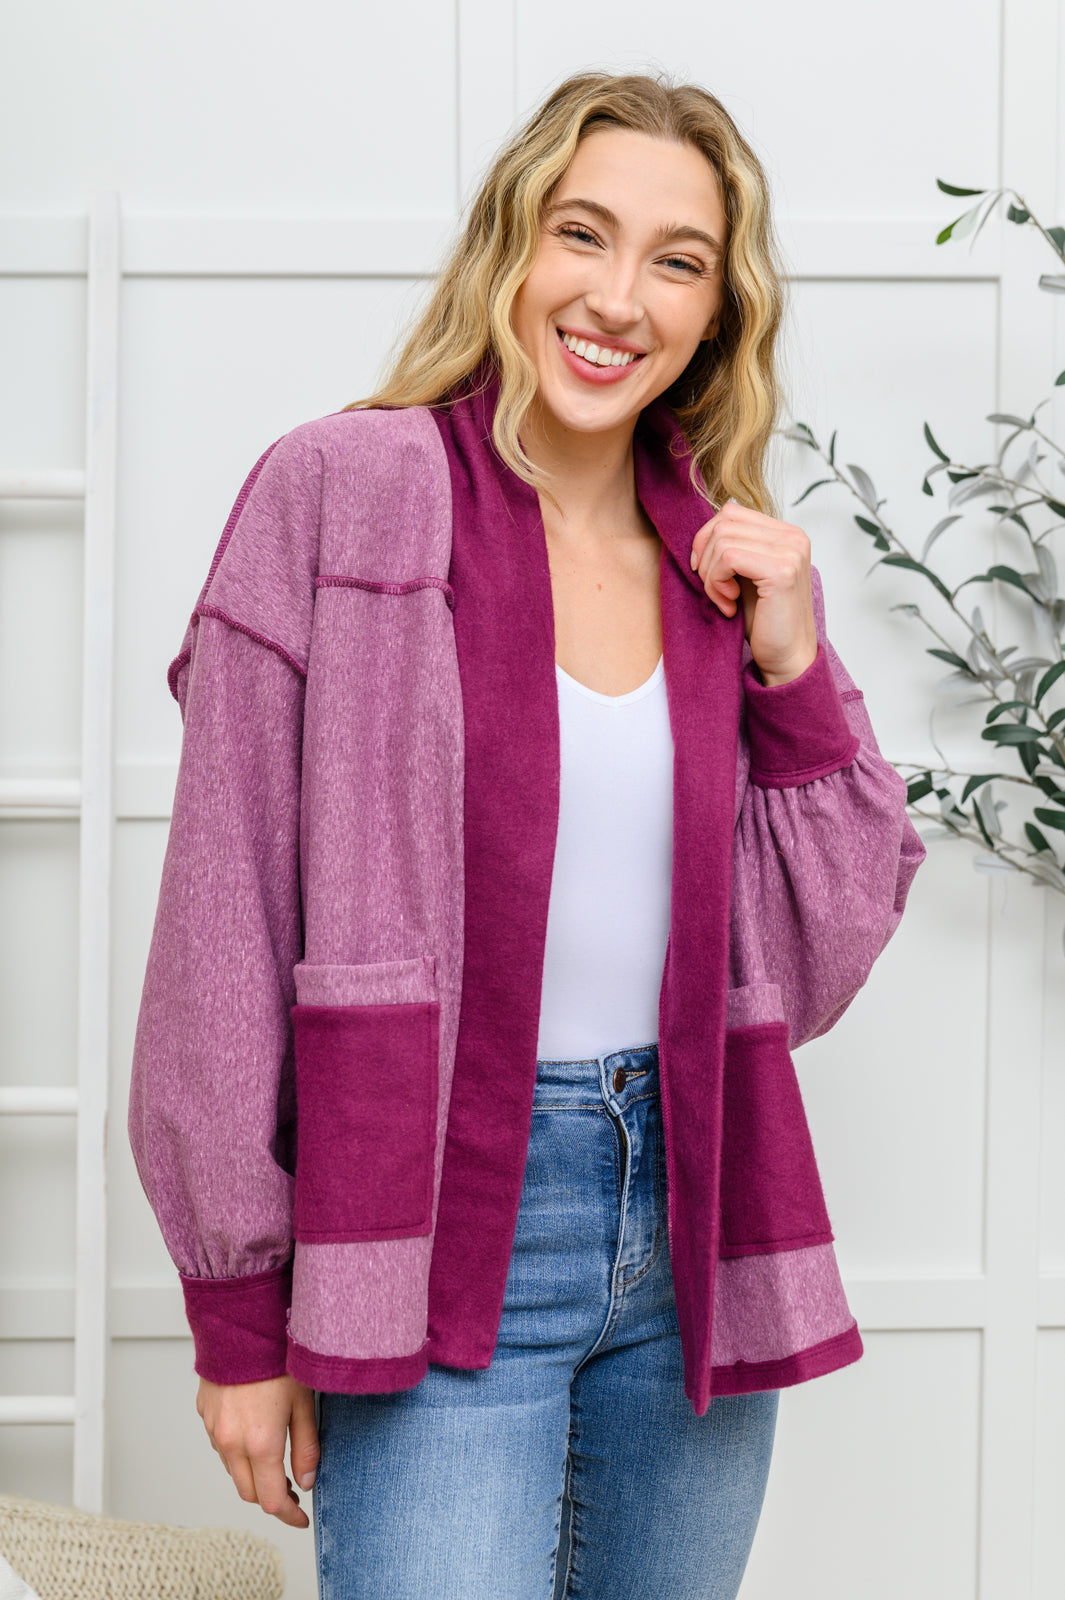 Knitted Hearts - Plum Jacket - Joy & Country